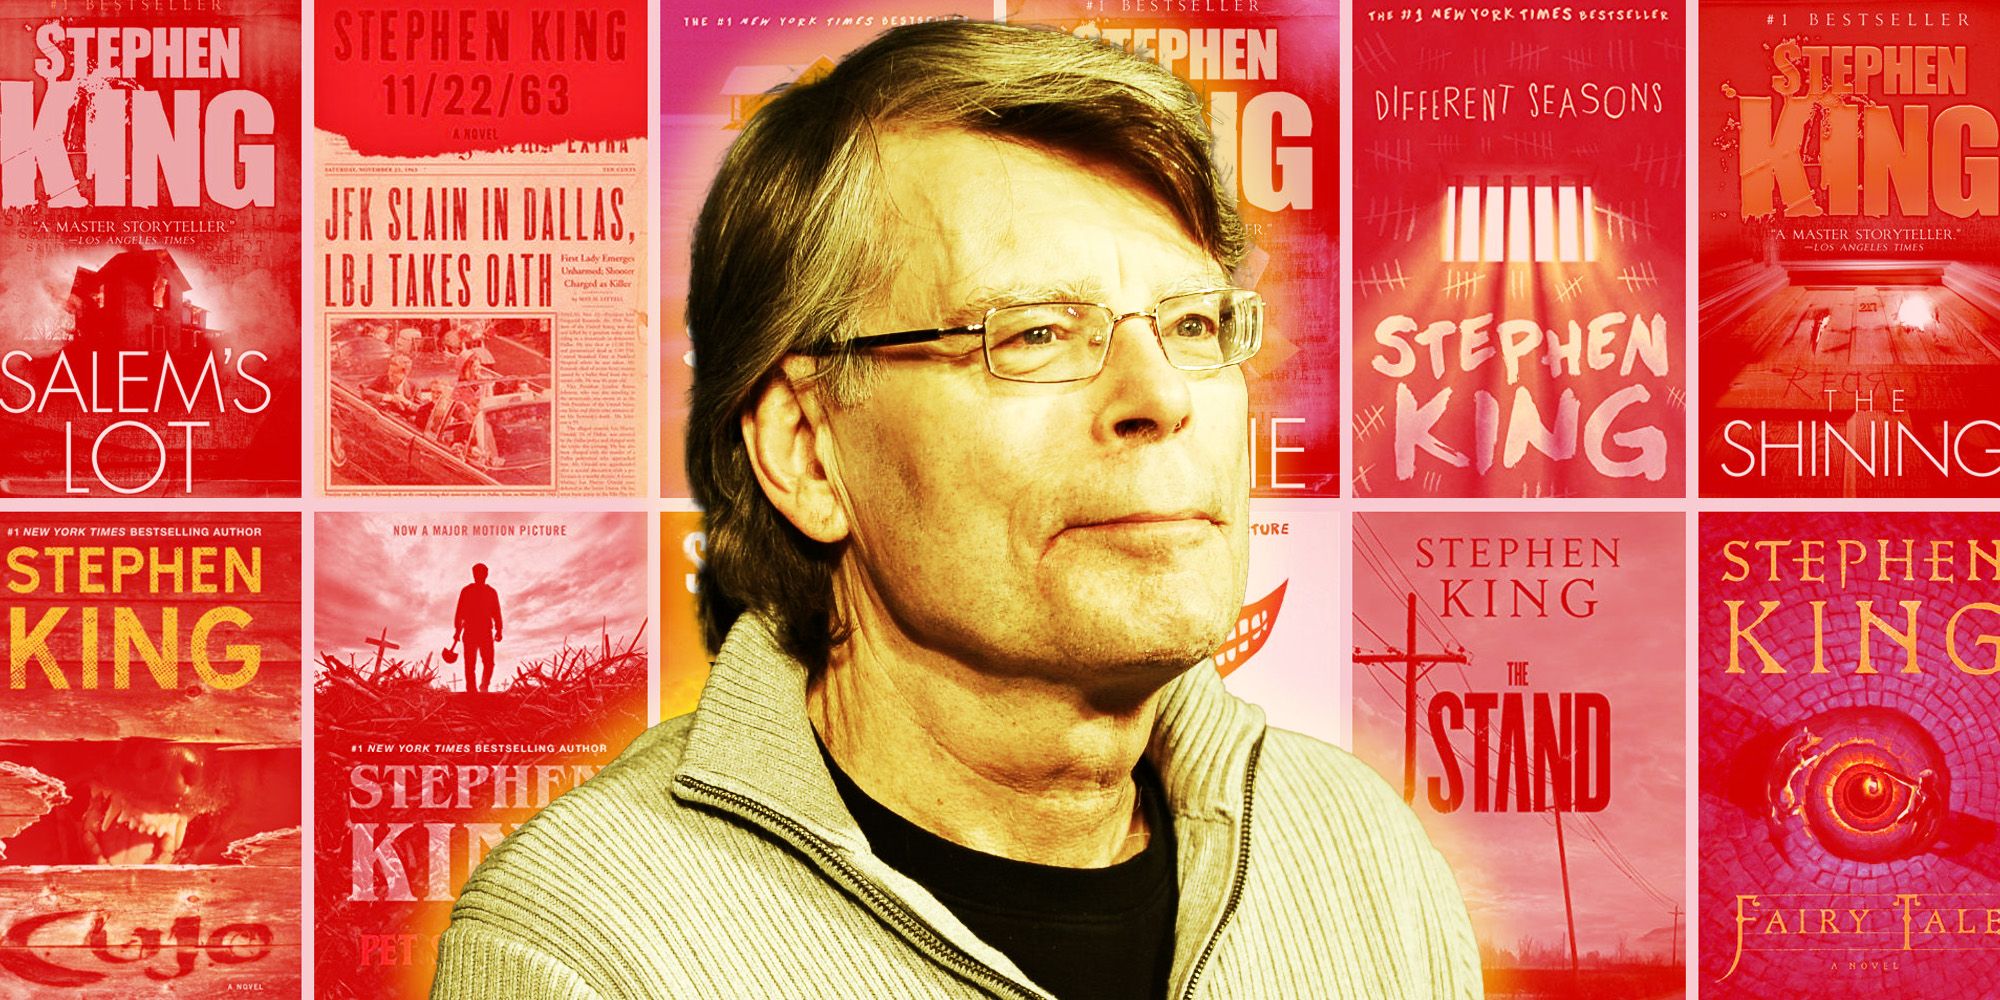 Stephen King and book covers